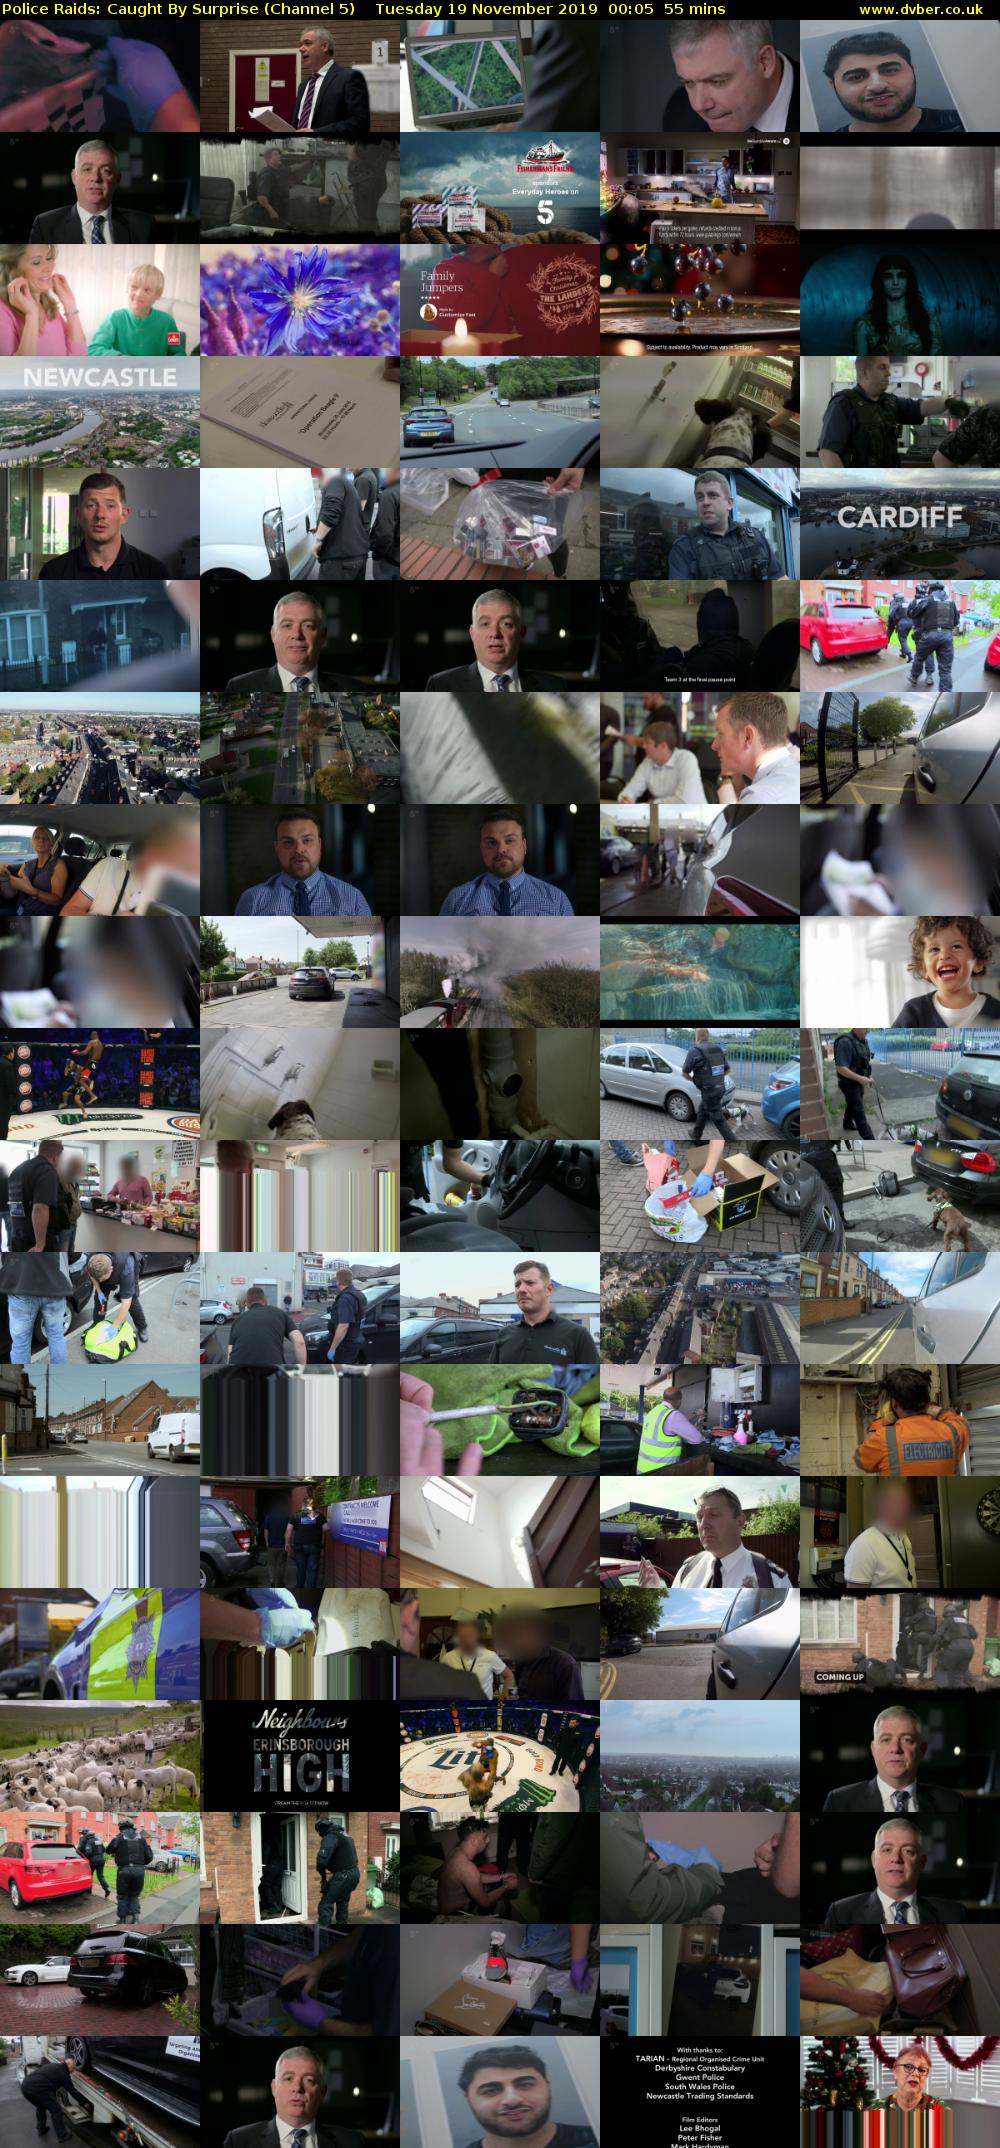 Police Raids: Caught By Surprise (Channel 5) Tuesday 19 November 2019 00:05 - 01:00